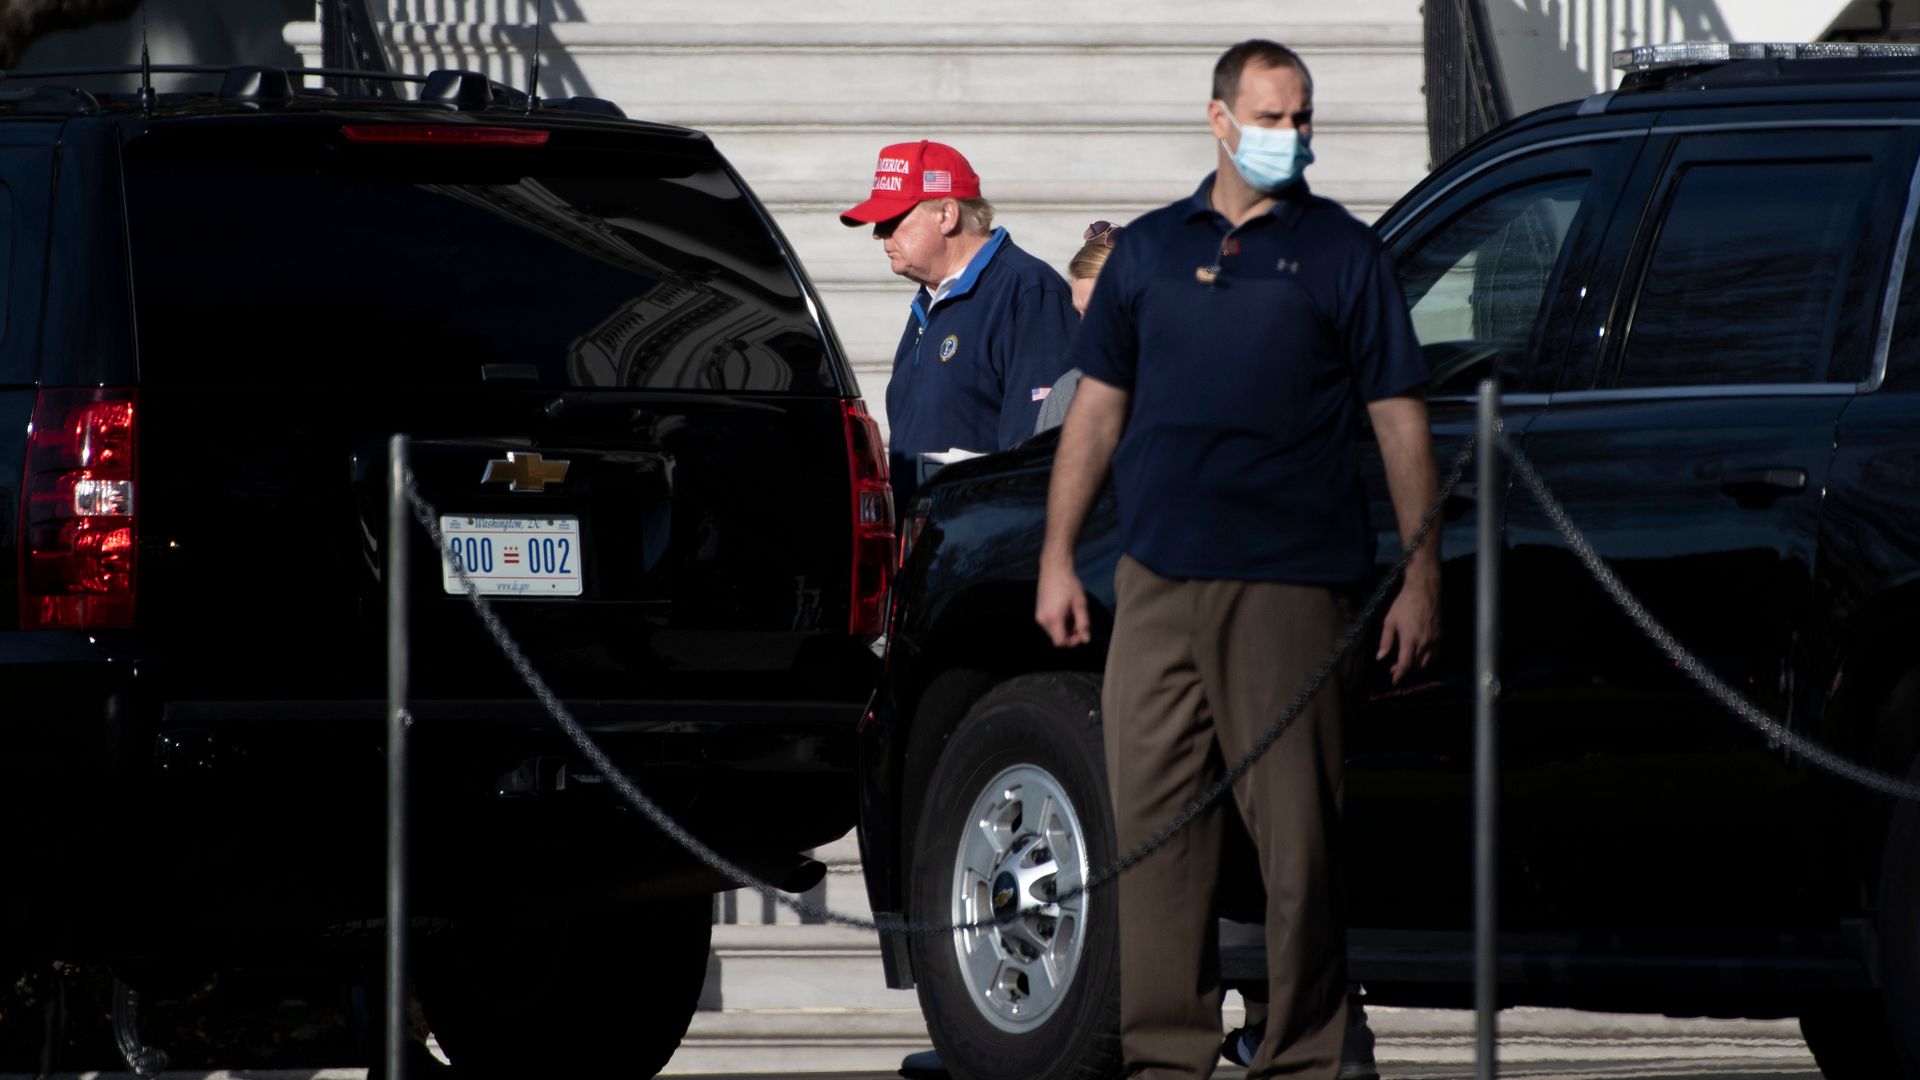 Dressed in a red MAGA had, President Trump heads to the golf course on Sunday.